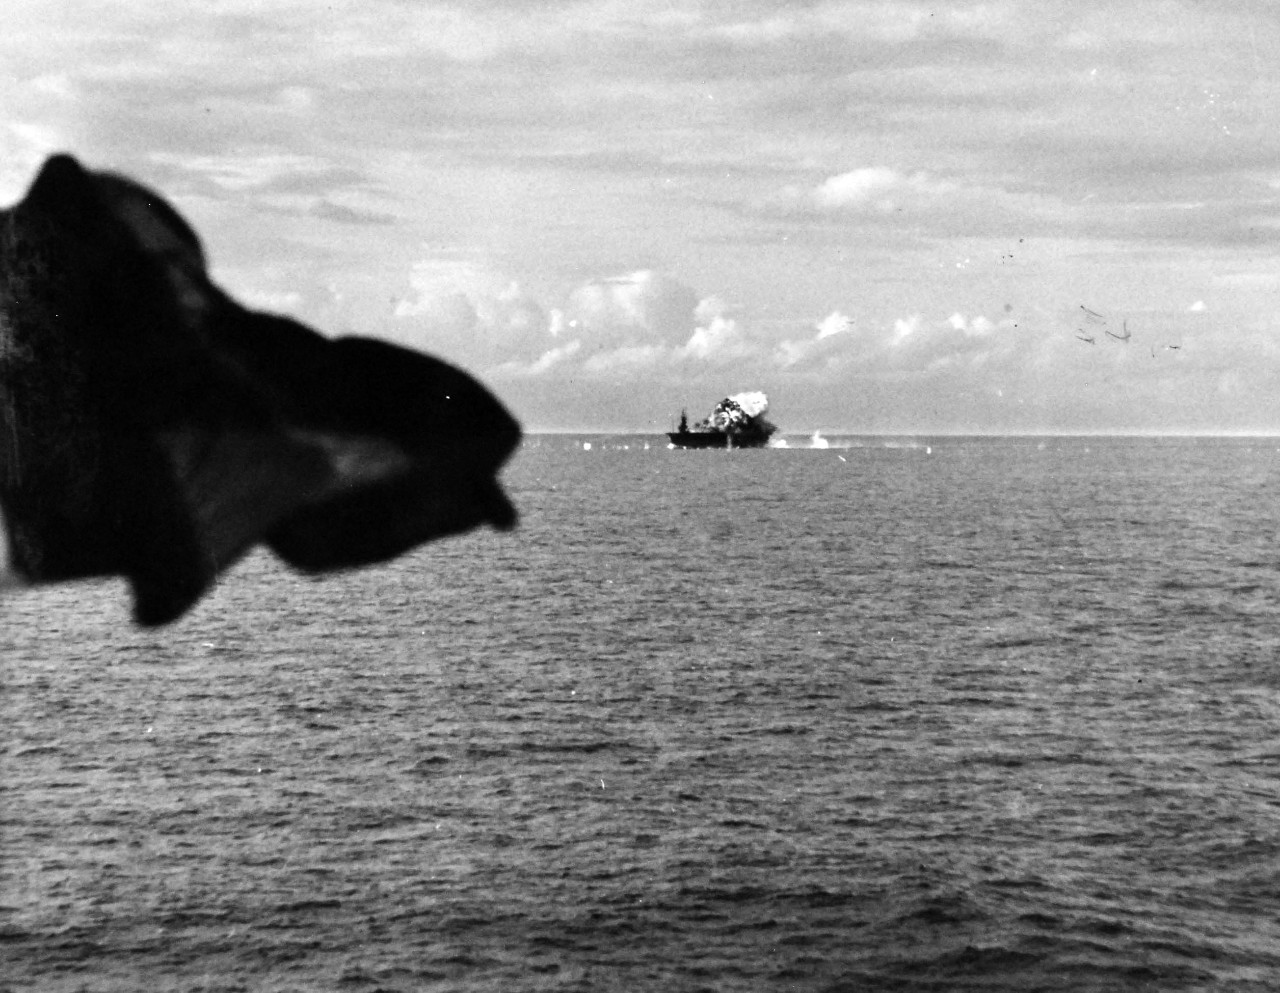 80-G-270663:  USS Santee (CVE-29), October 25, 1944.  Japanese suicide plane attacking USS Santee (CVE-29), hitting after end of flight deck off Leyte Gulf.  As seen from USS Suwannee (CVL-27).  Official U.S. Navy photograph, now in the collections of the National Archives.  